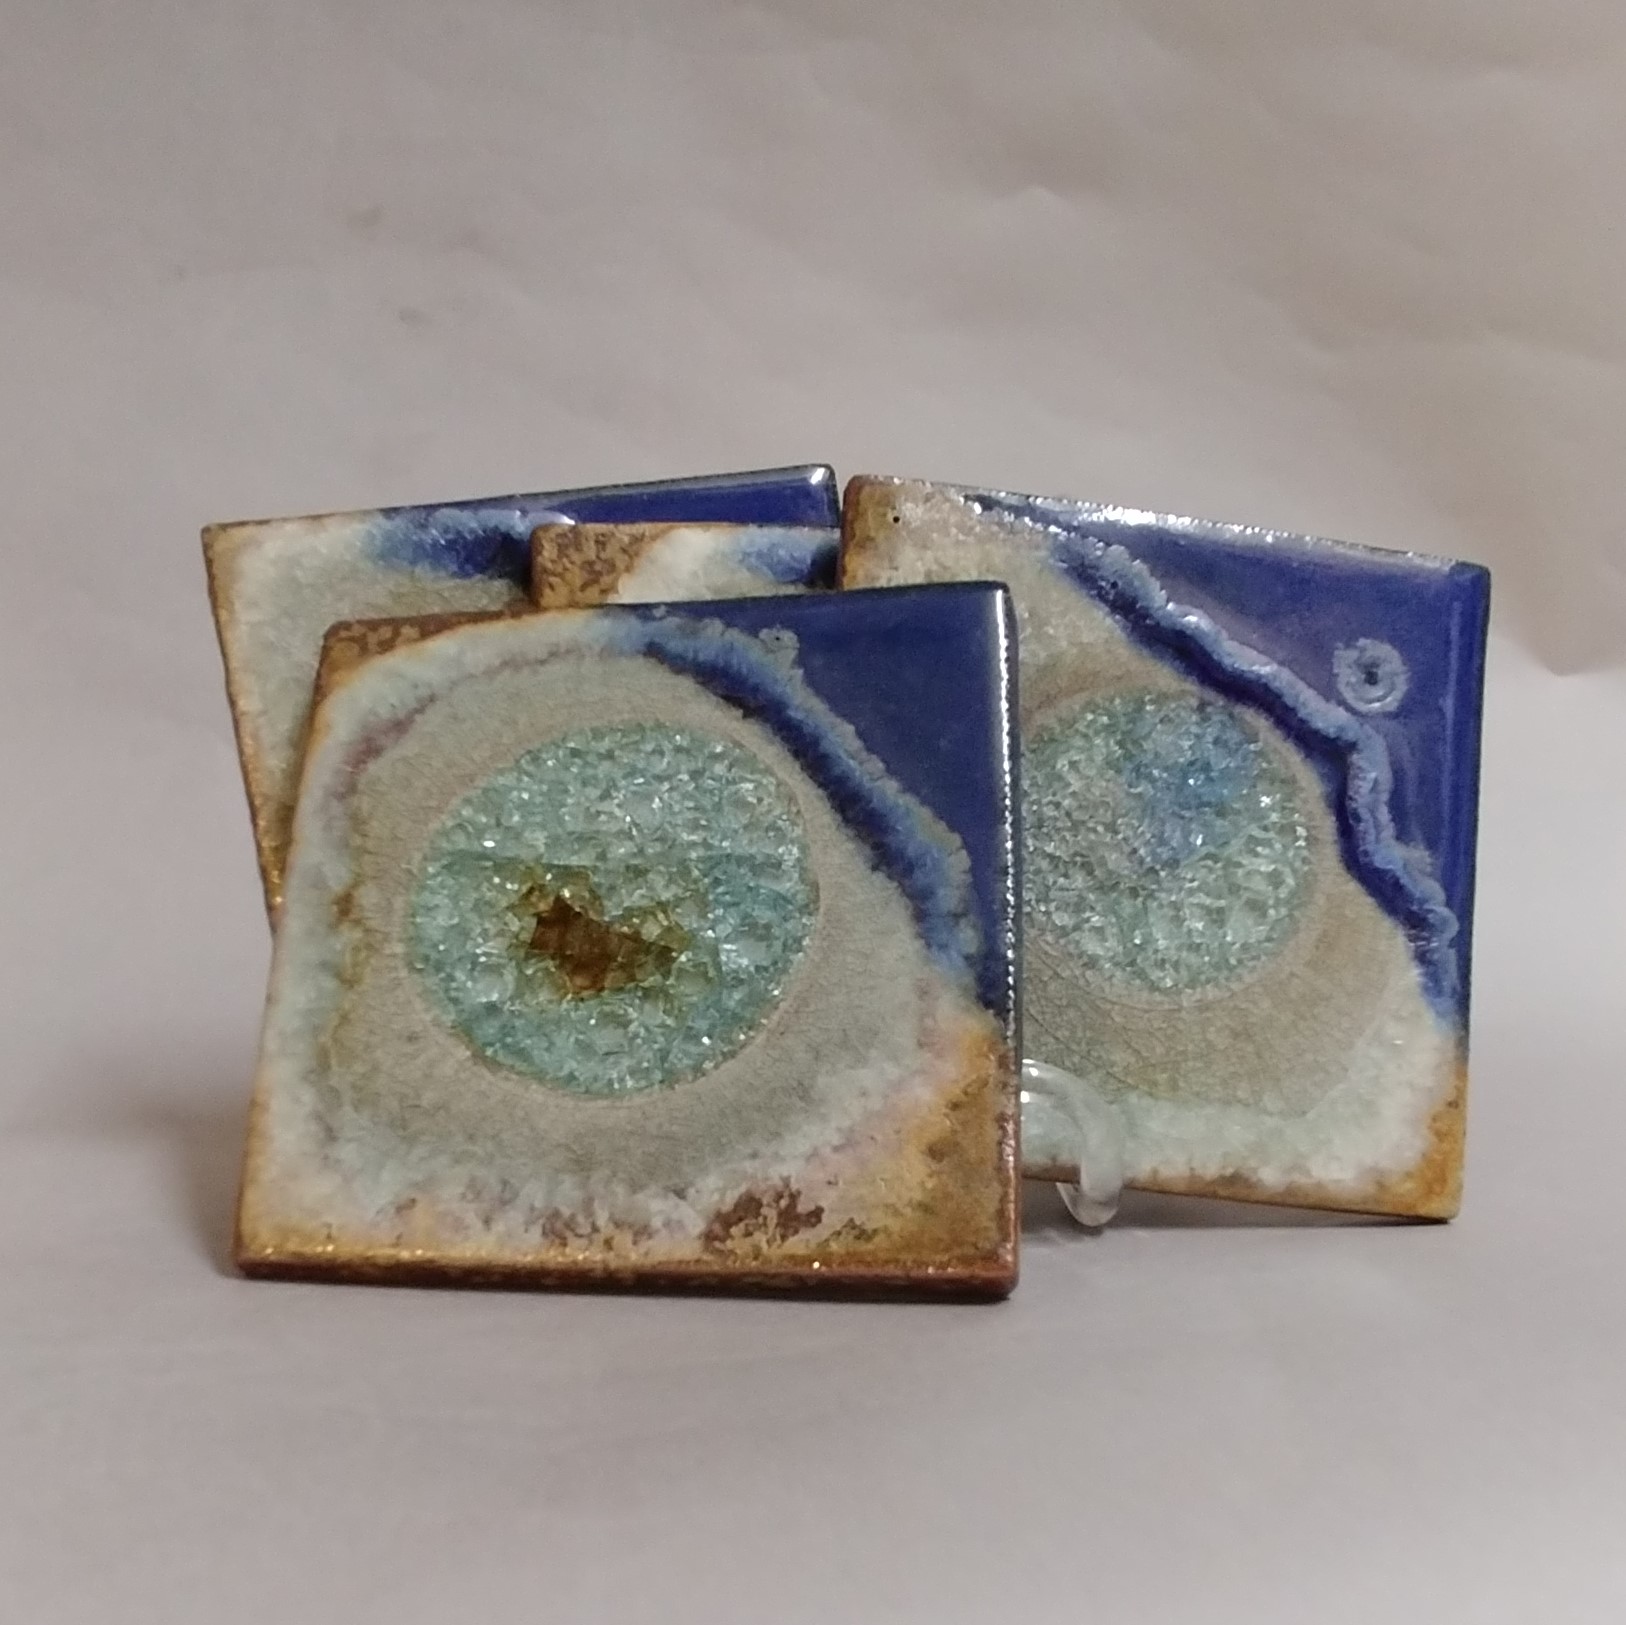 KB-588 Coasters Set of 4 Blue and Copper $43 at Hunter Wolff Gallery